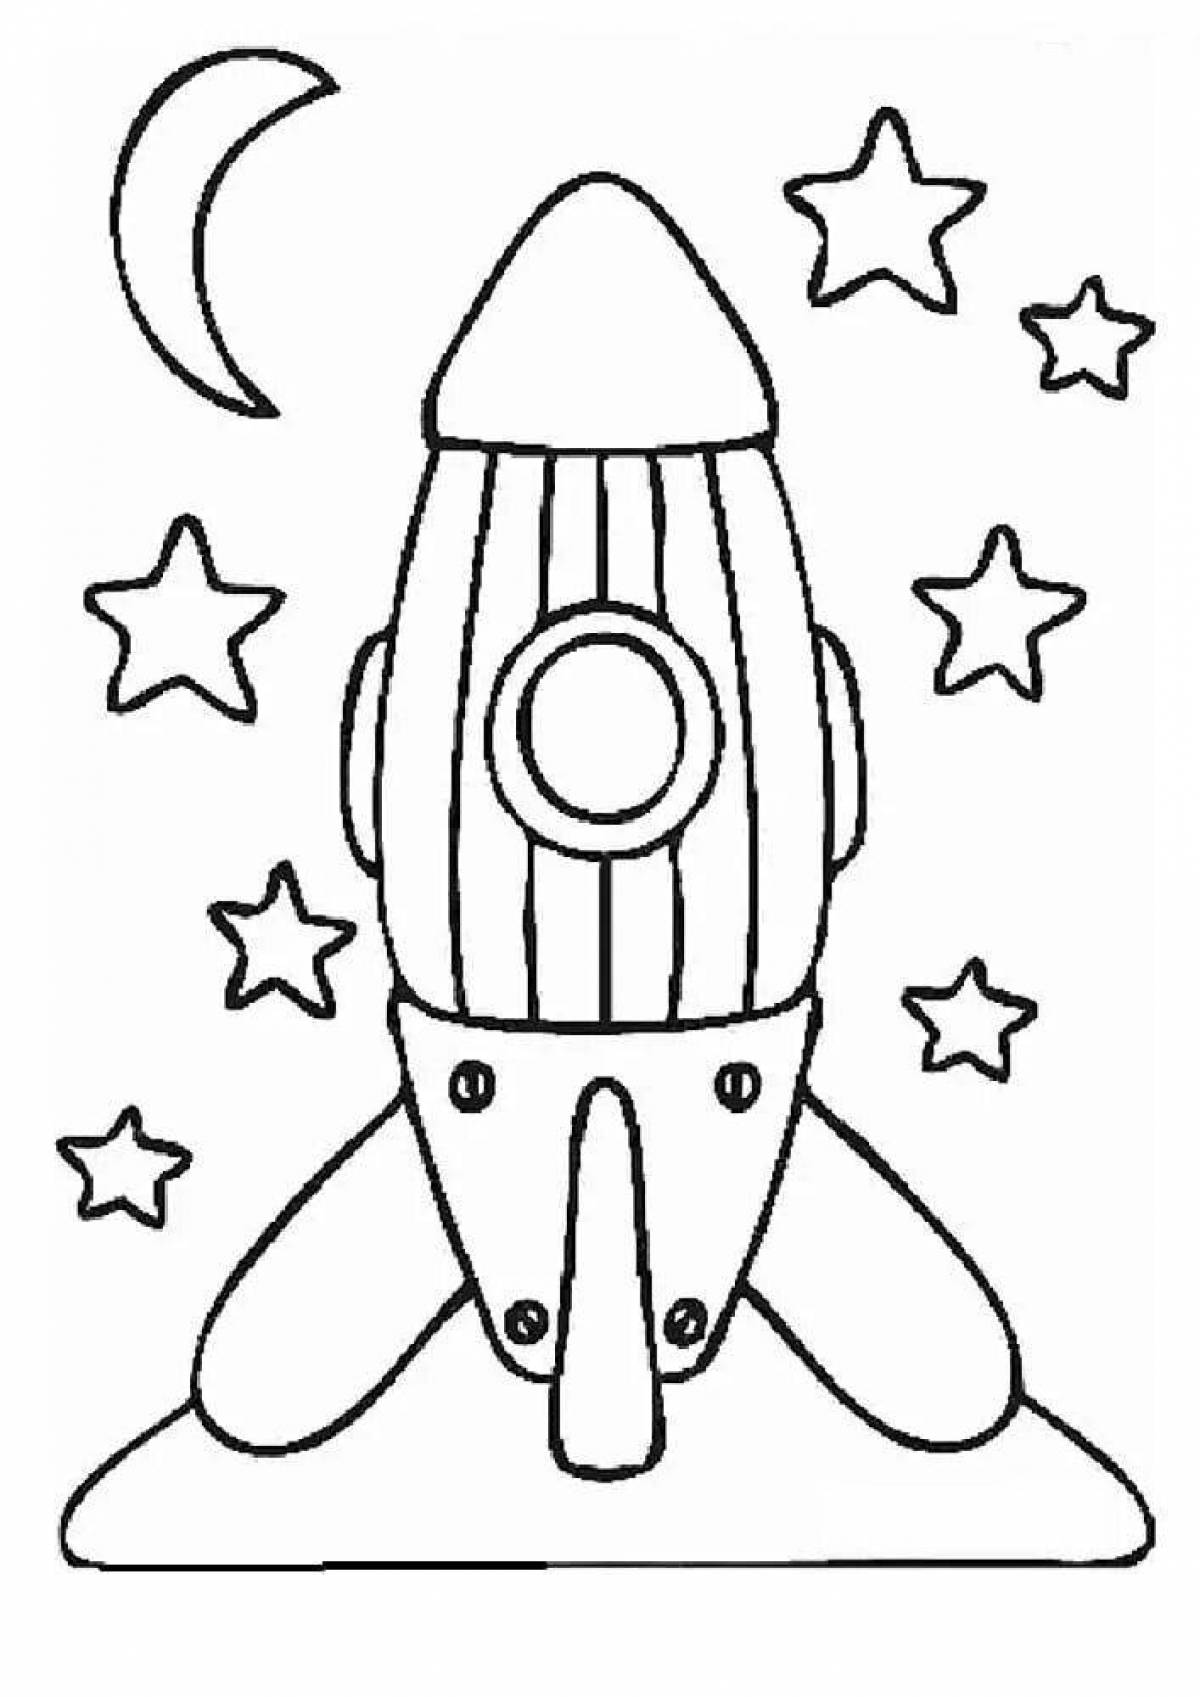 Drawing of an amazing rocket